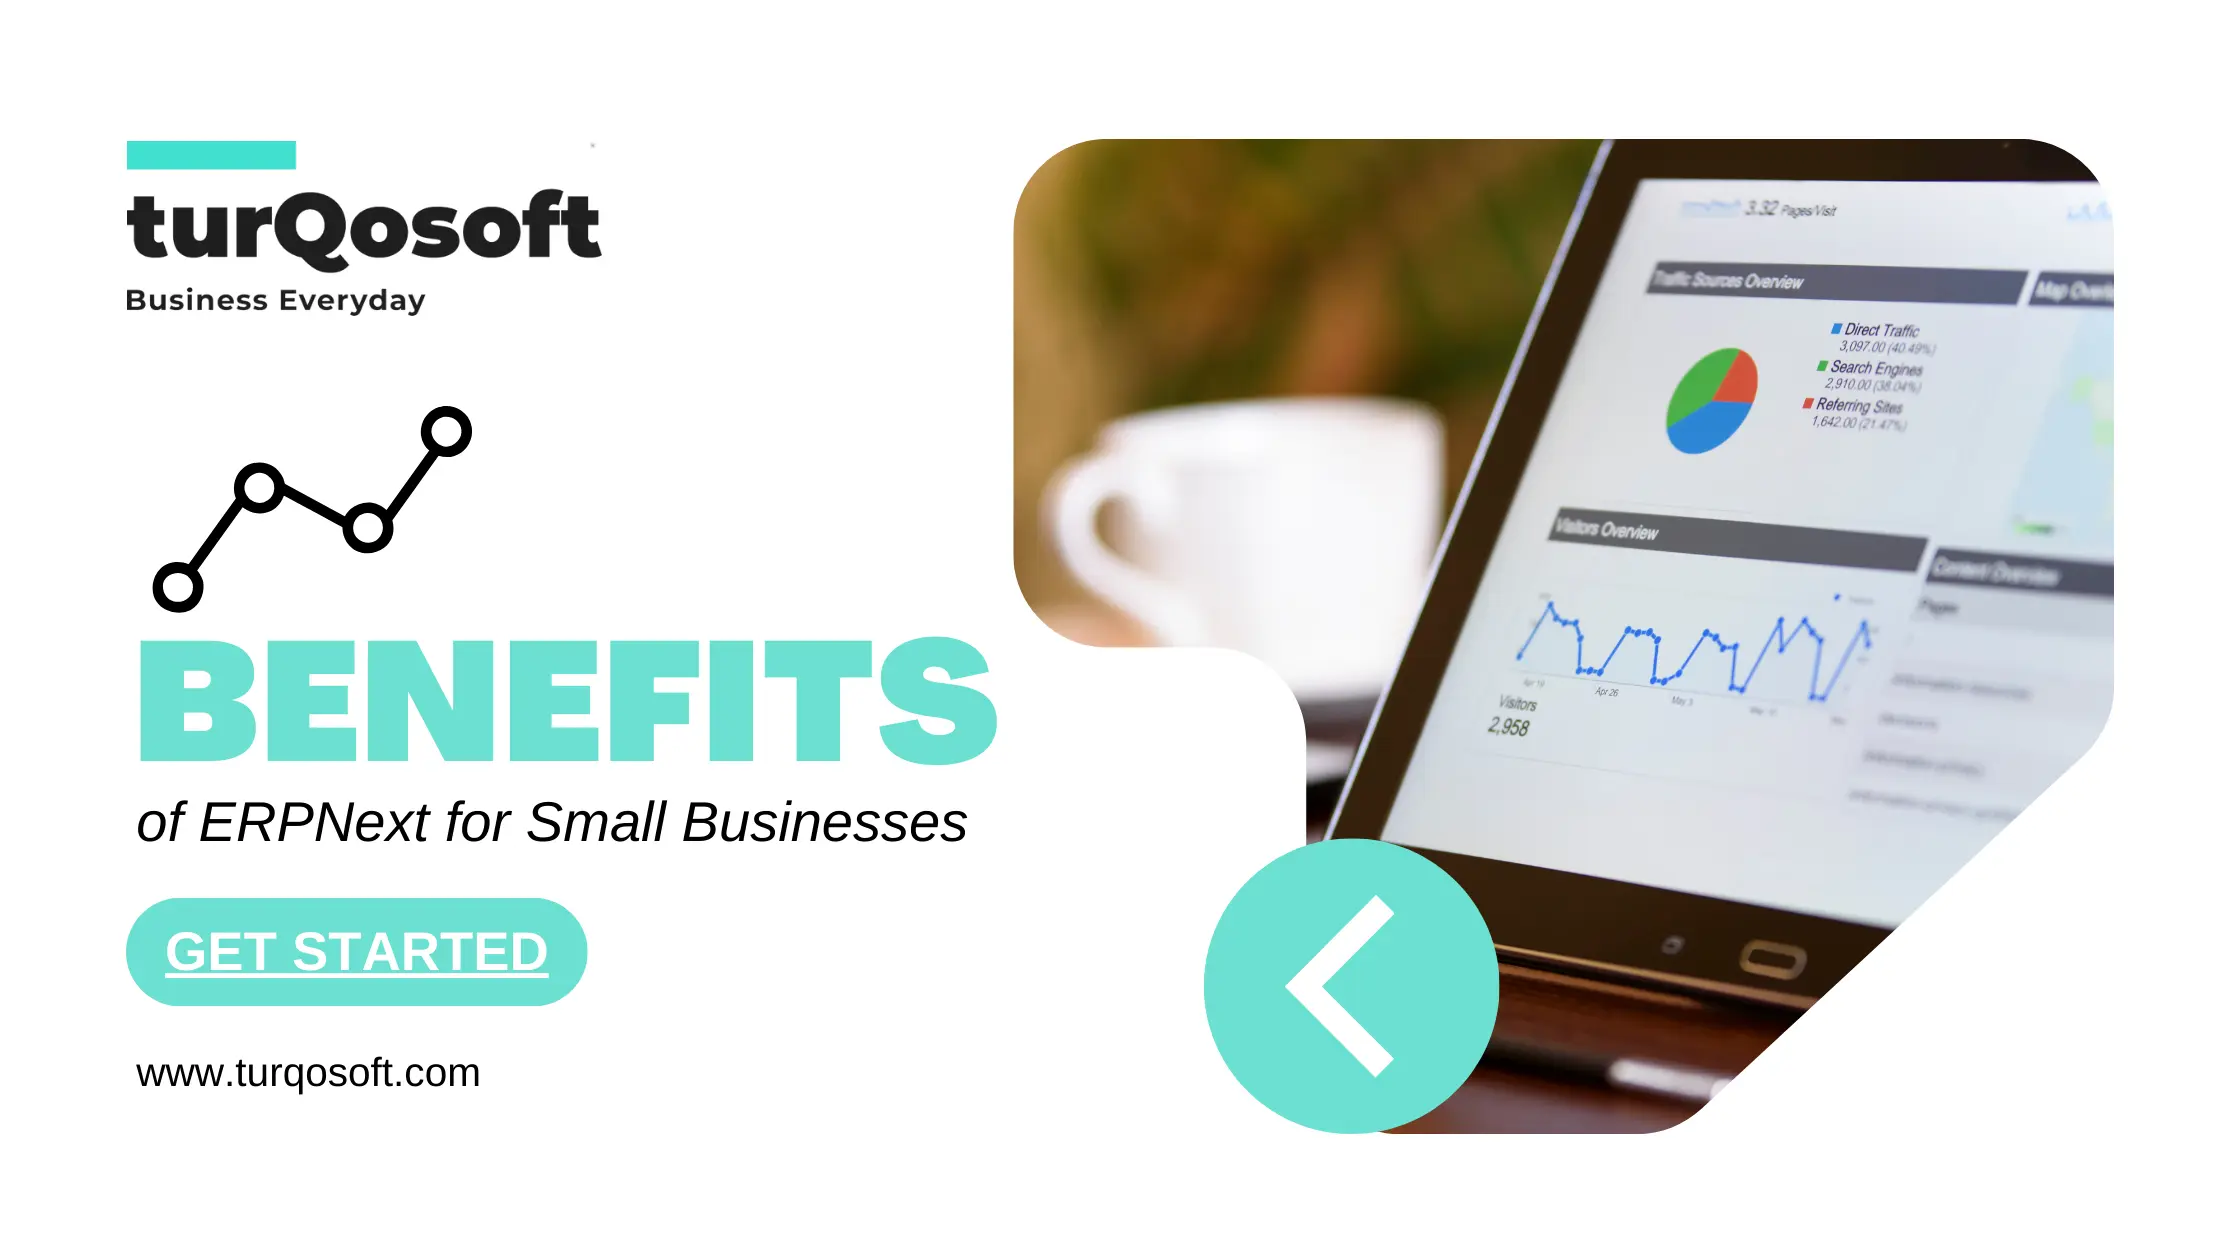 The Benefits of ERPNext for Small Businesses